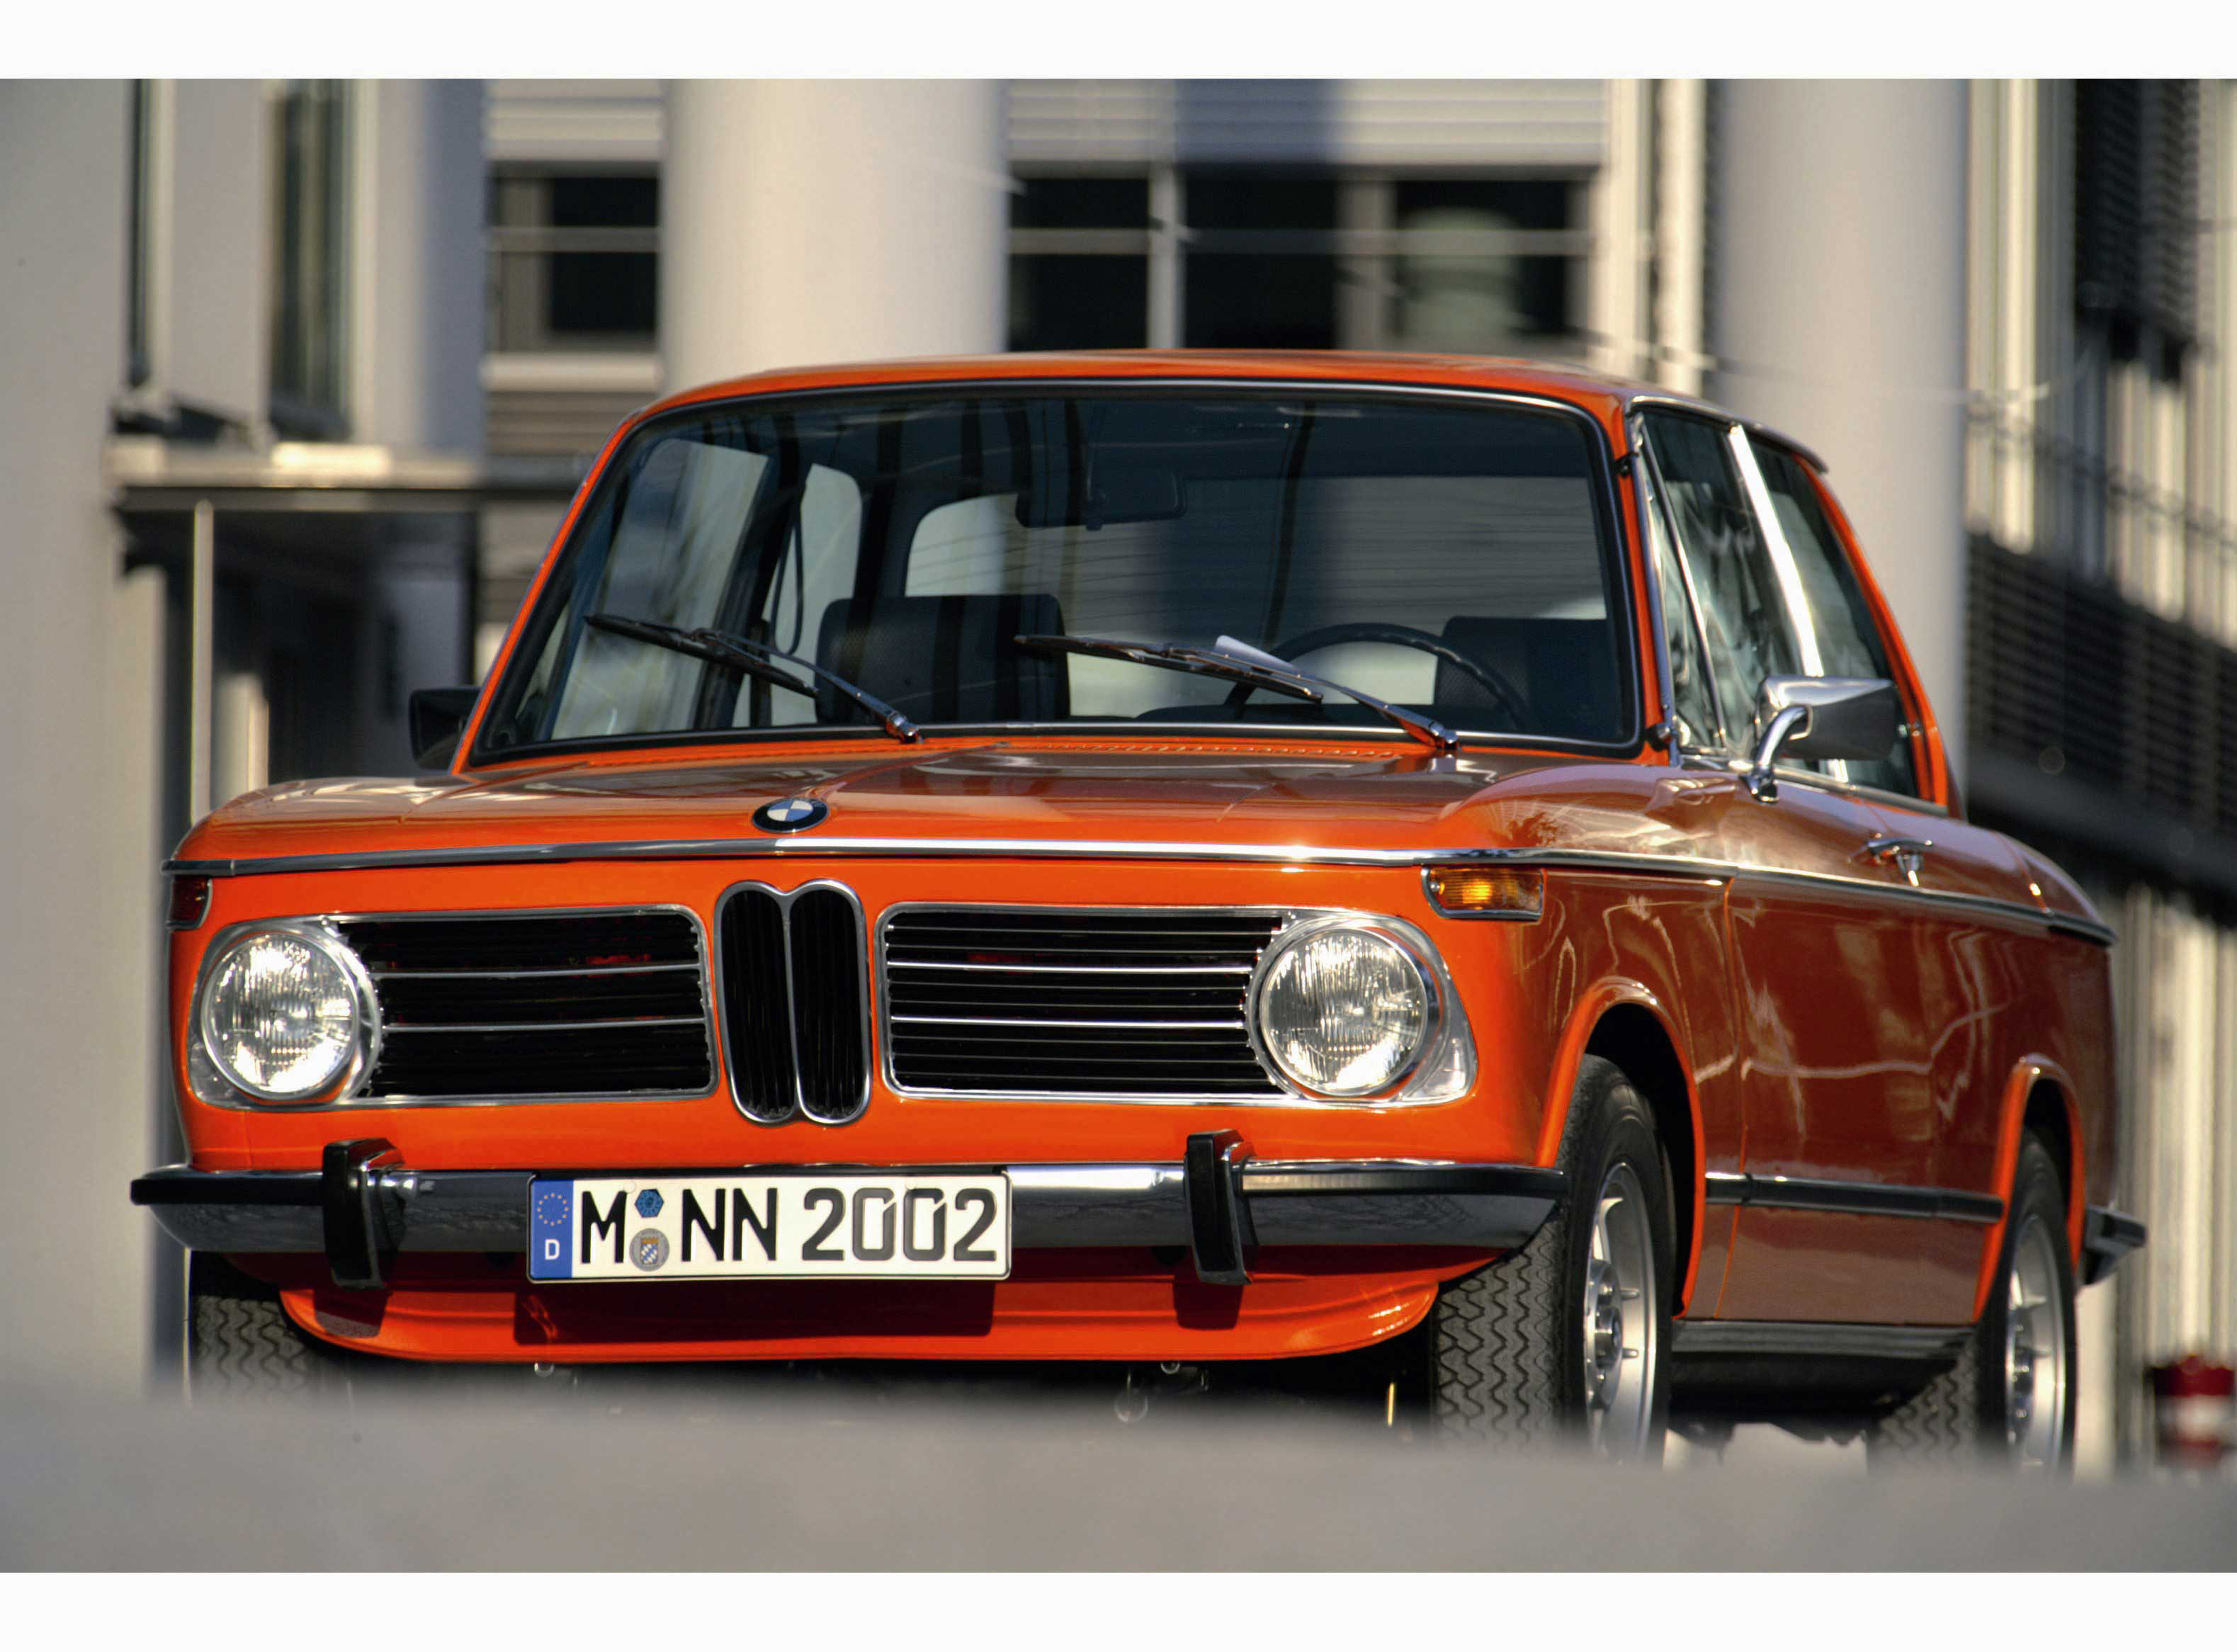 When the past becomes actual today with BMW 2002 1502 model #2